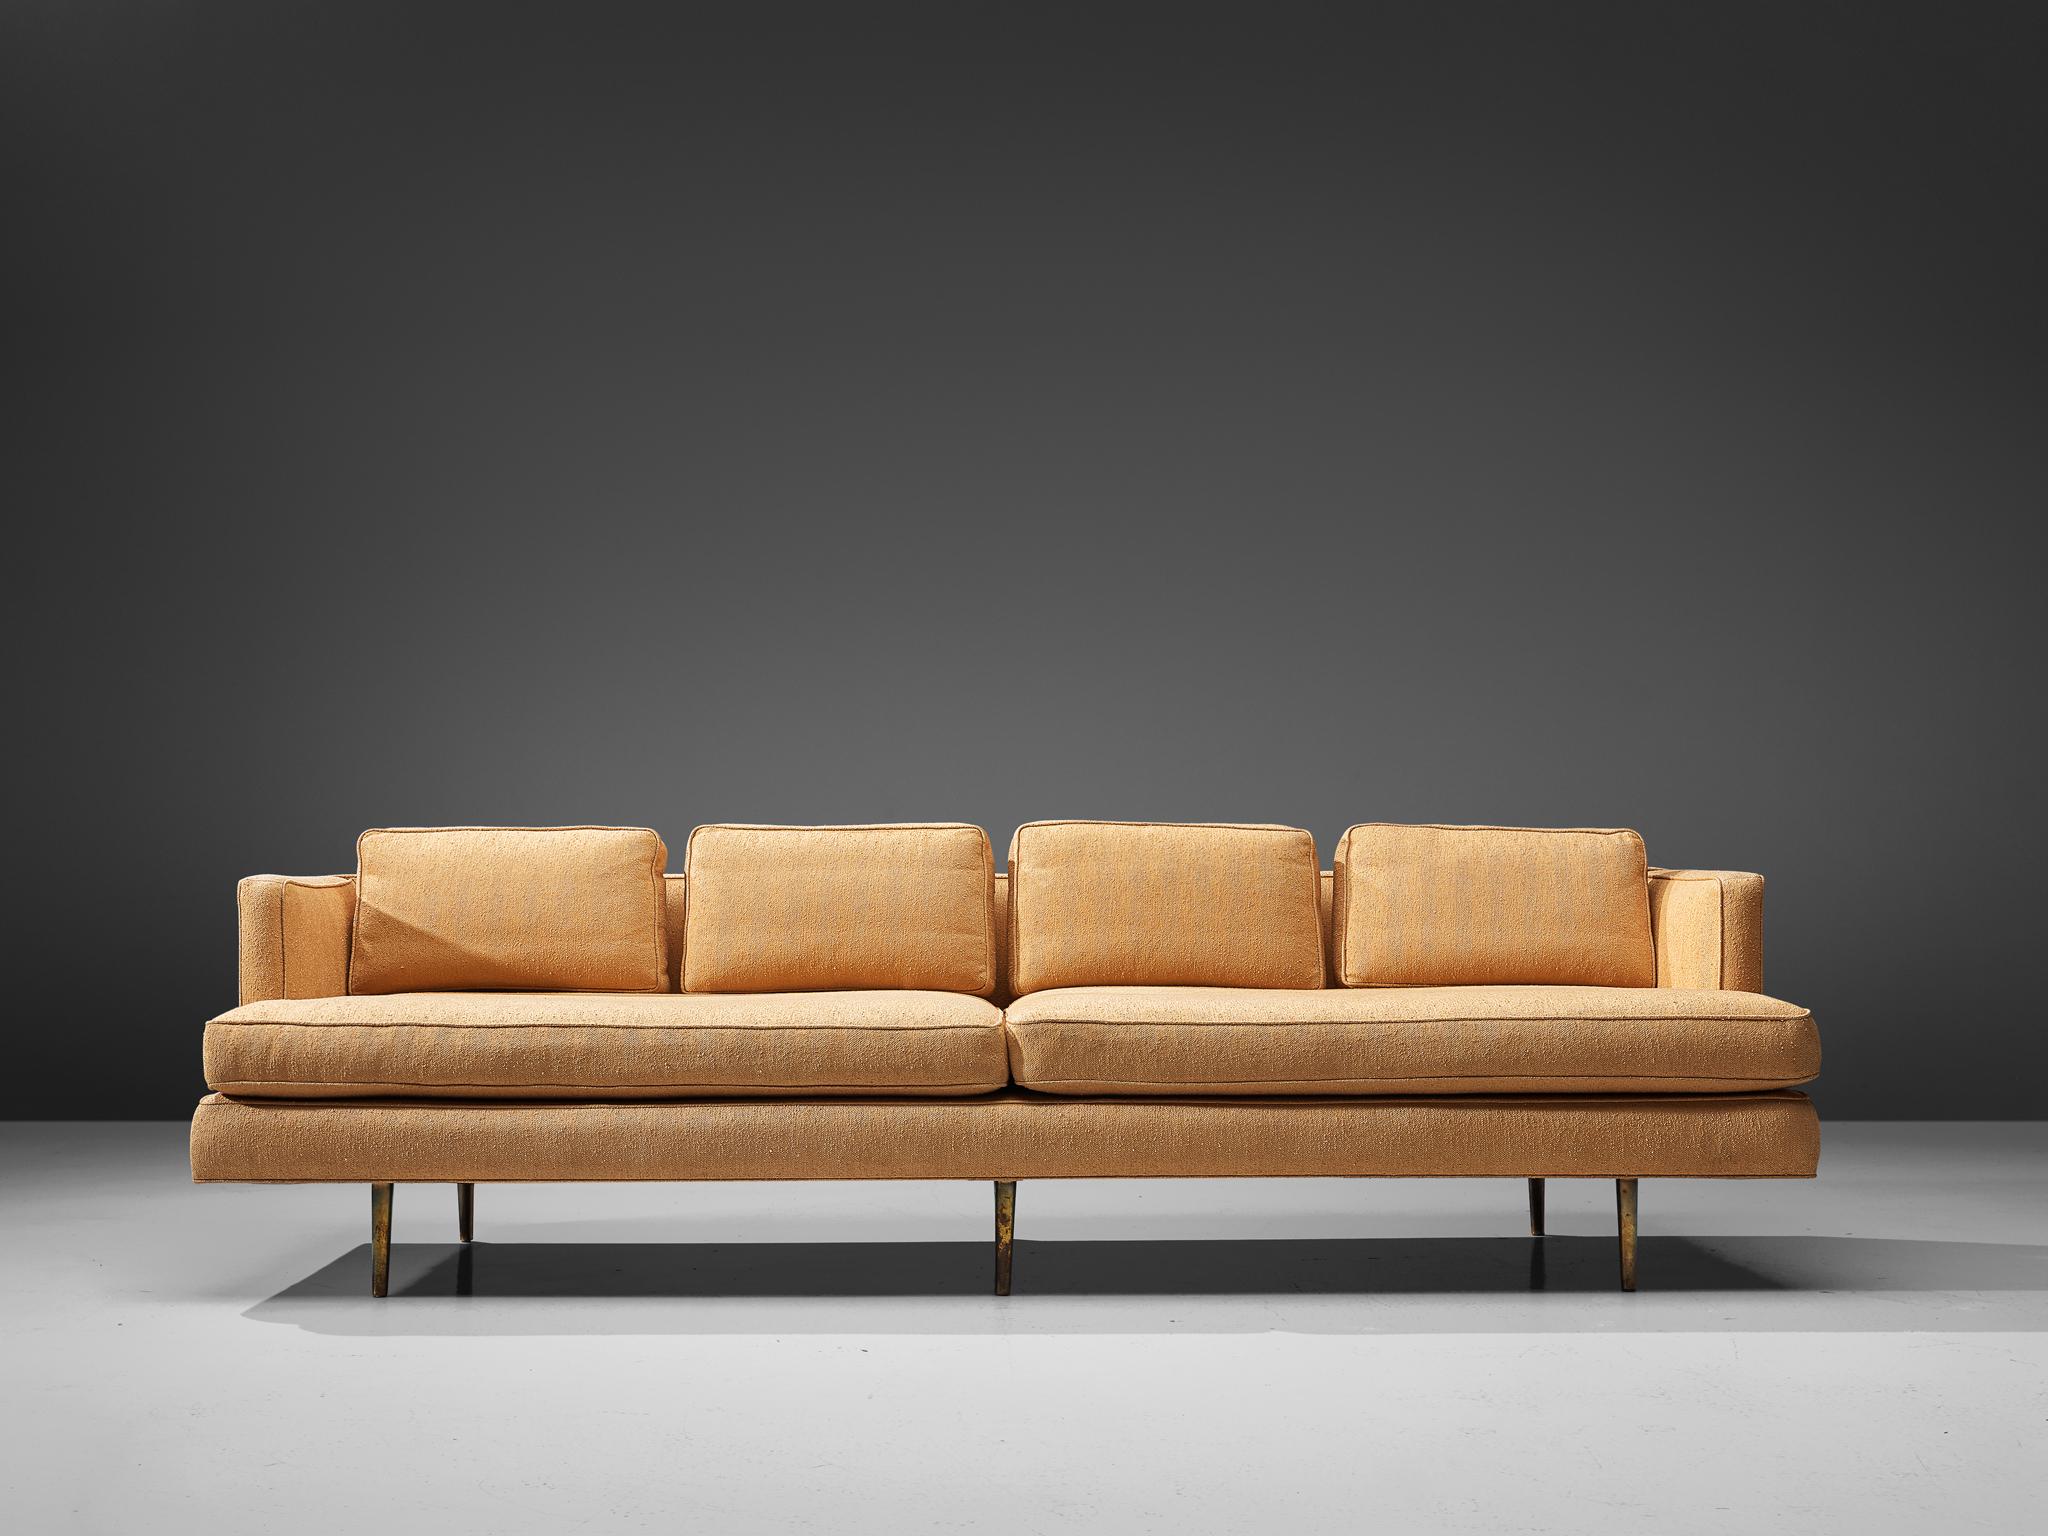 Edward Wormley for Dunbar, sofa model 4907, fabric and brass, United States, circa 1955.

A remarkable sofa by Edward Wormley that is purely elegant, as it bears features of classic design combined with Minimalist, sober influences. In the words